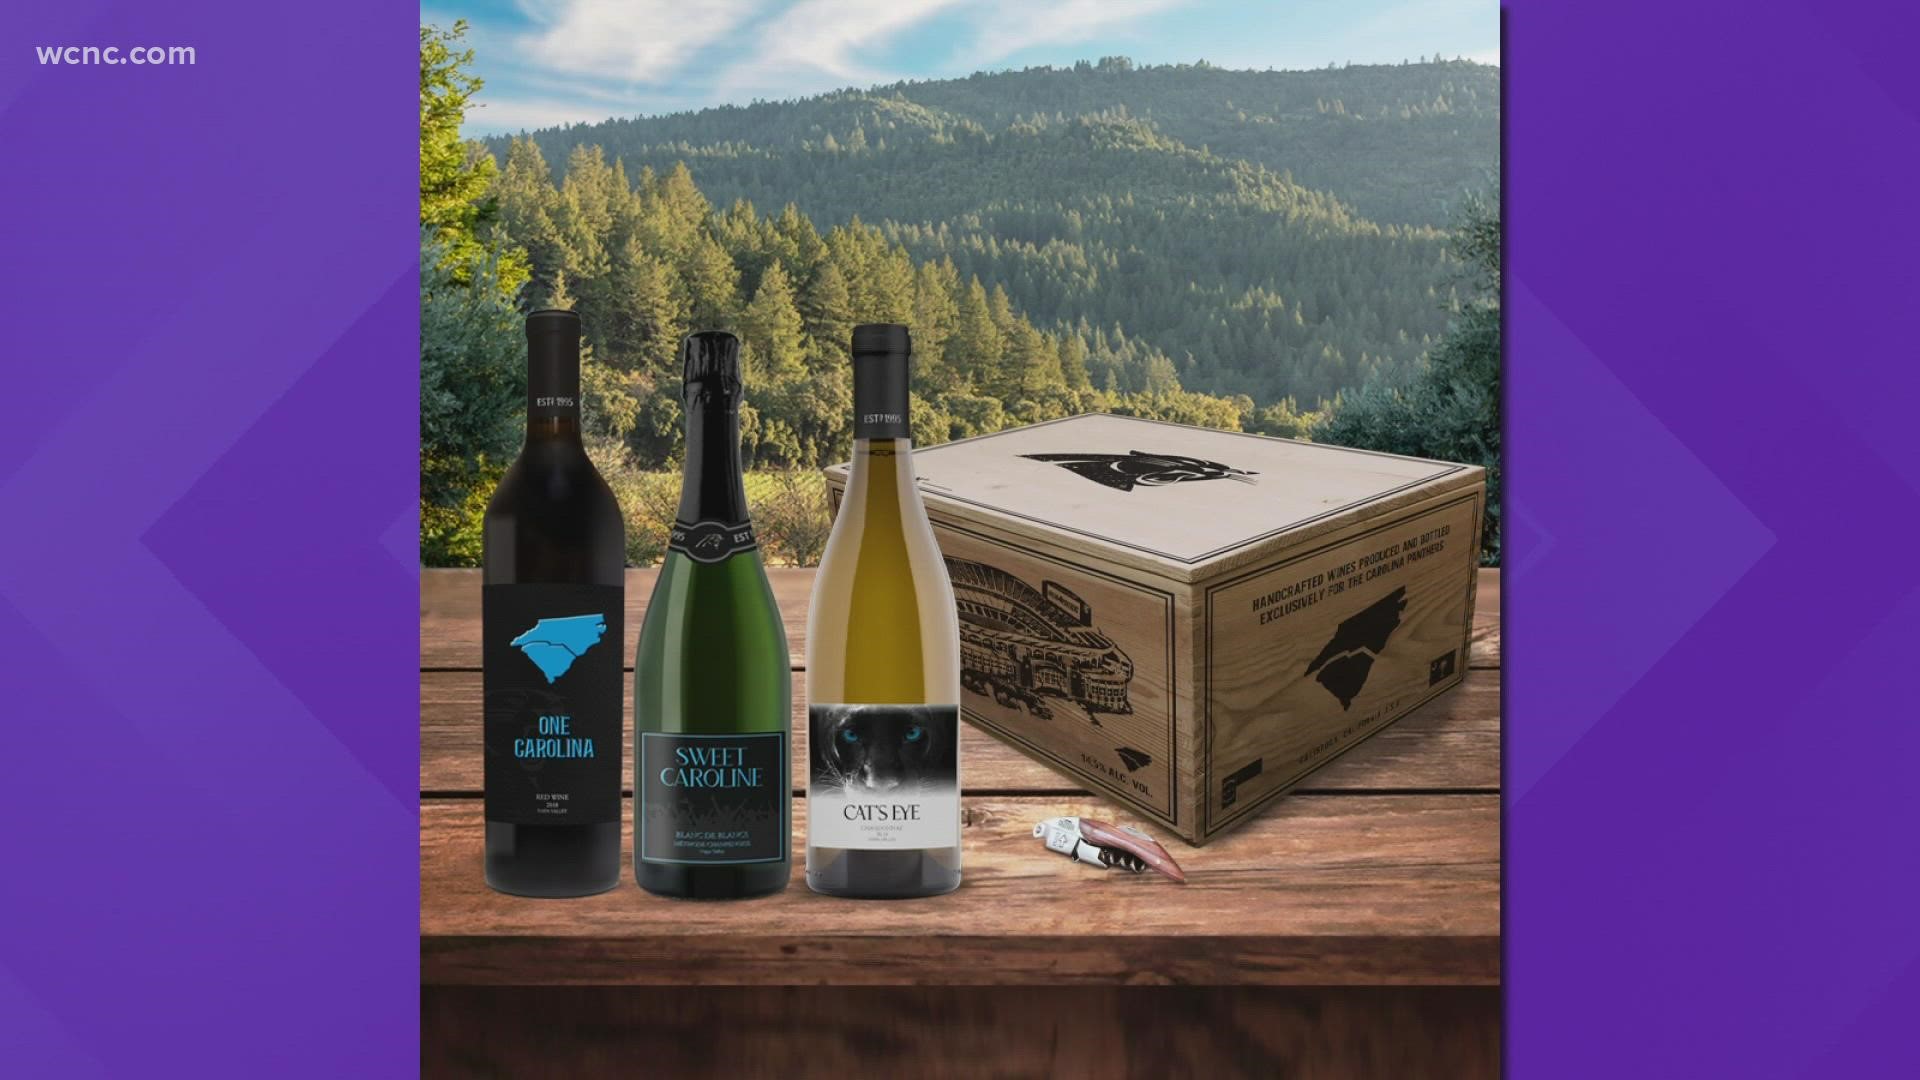 The Panthers launched its own subscription wine club, called The Inner Circle and features a city of wines under the brand name Prowling Vineyards Napa Valley.